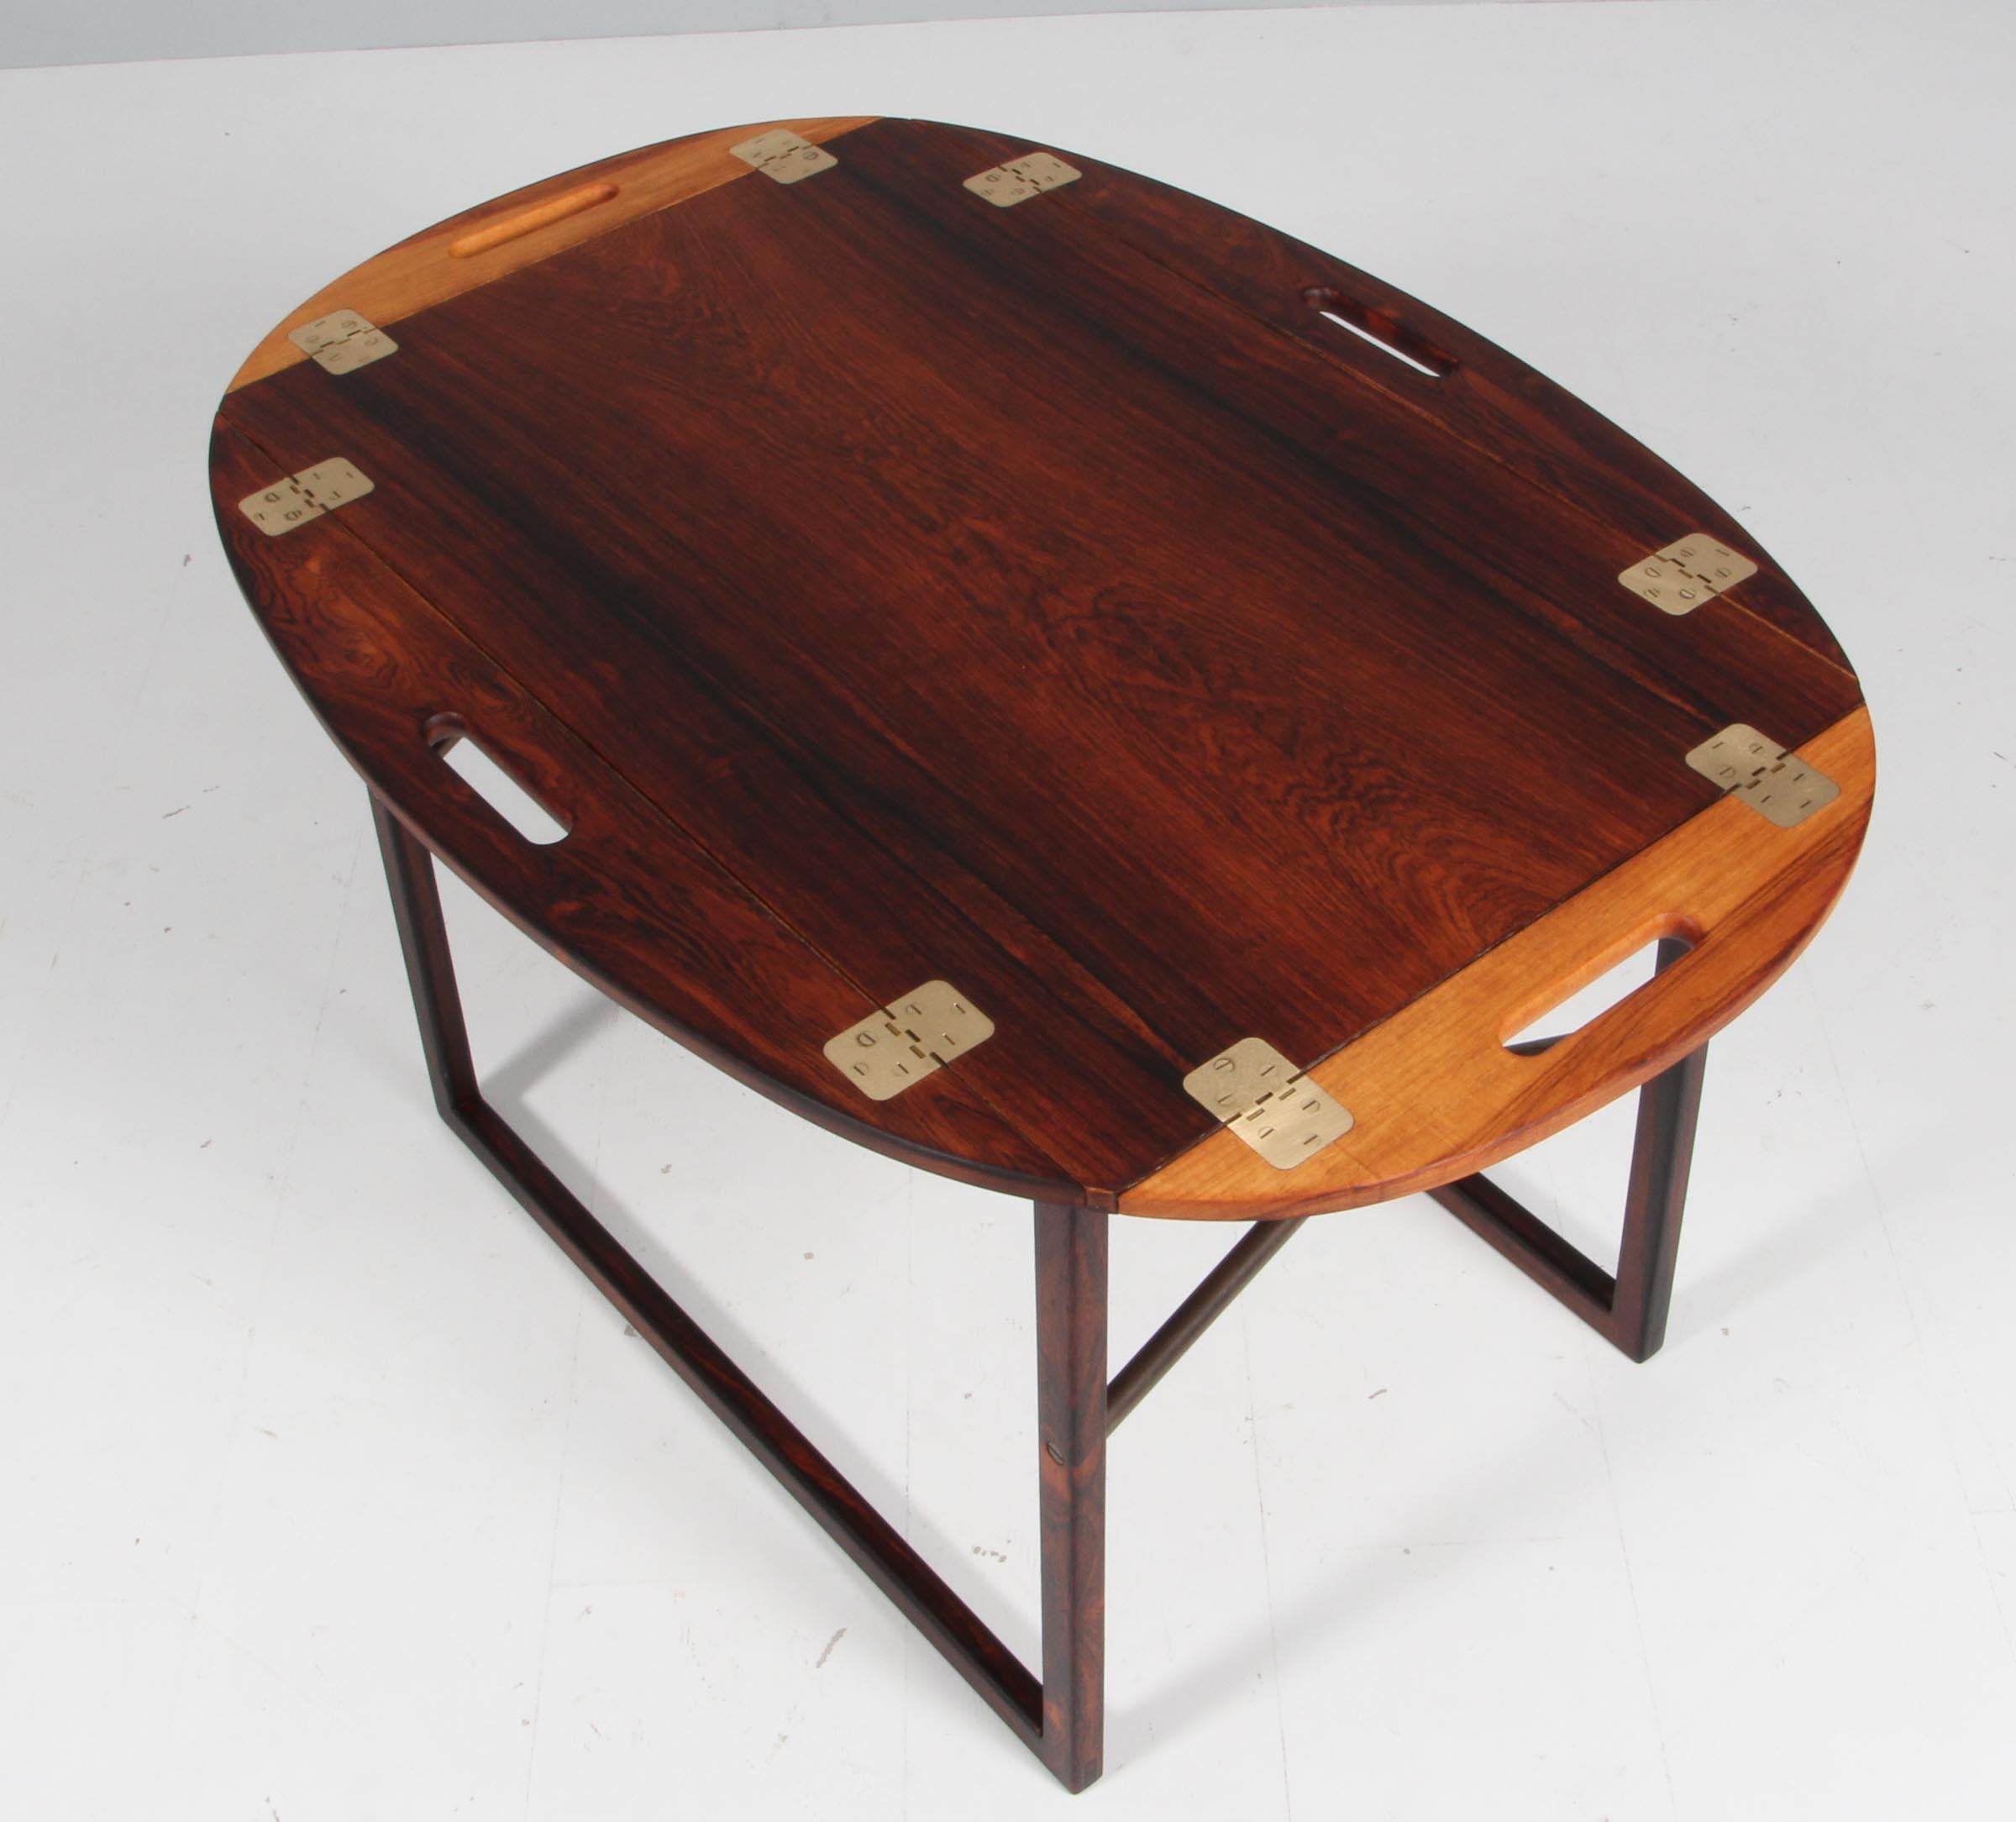 All original, excellent condition tray table (removable tray) in Brazilian rosewood with brass cross stretchers. Danish modern design by Svend Langkilde for Illums Bolighus.